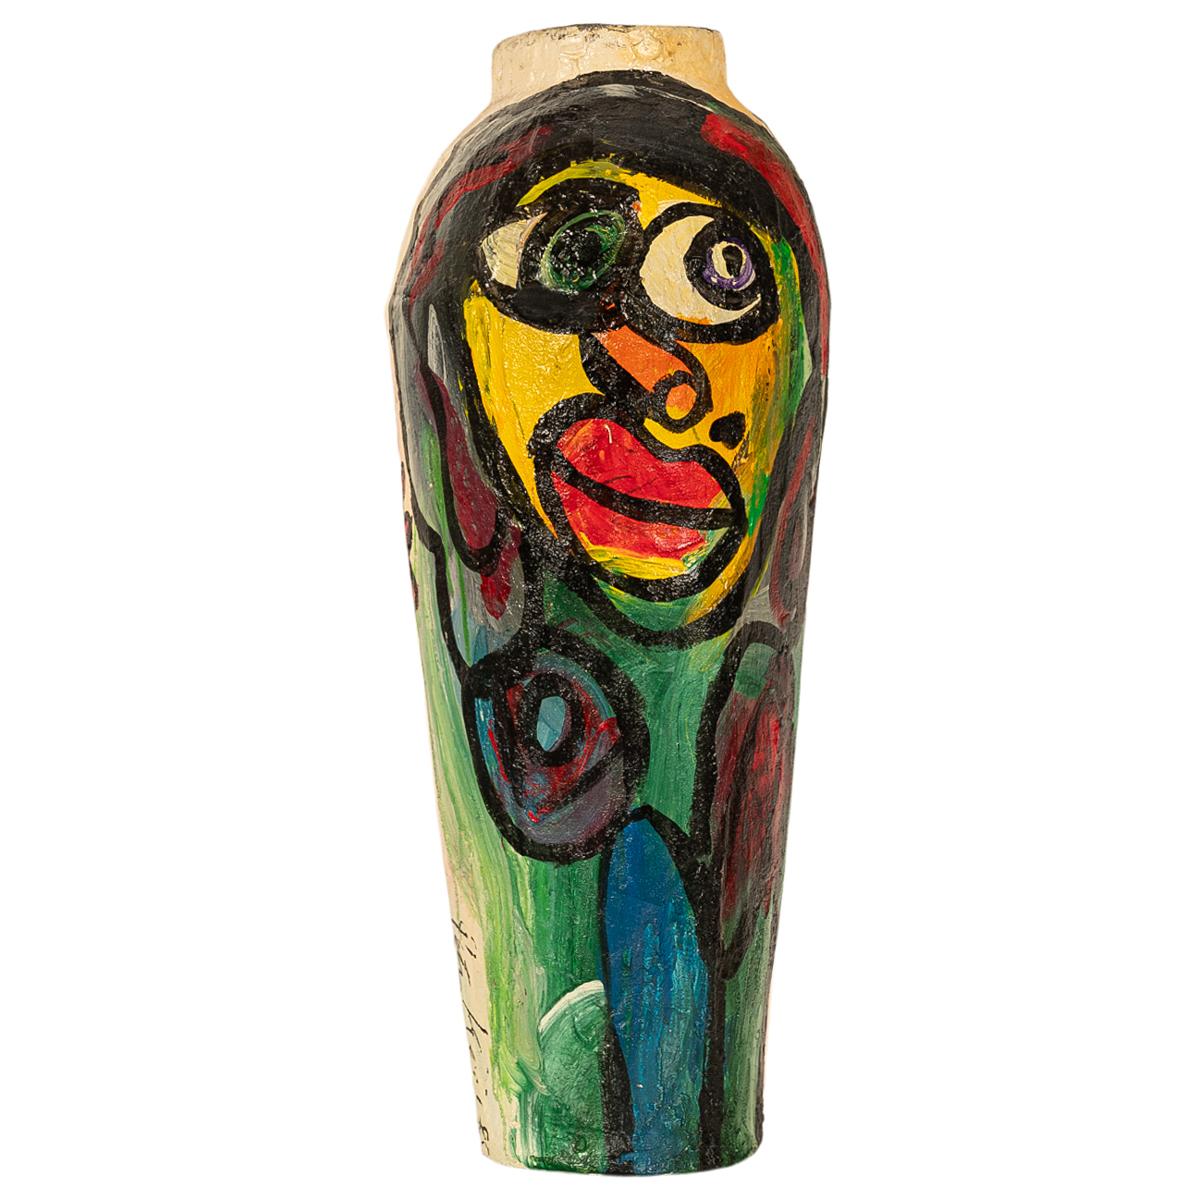 A large abstract Expressionist sculpture floor vase by the celebrated German-American Expressionist artist Peter Robert Keil (b. 1942), signed & dated 1985.
The floor vase is of large size and created from Papier Mache, it features a brightly